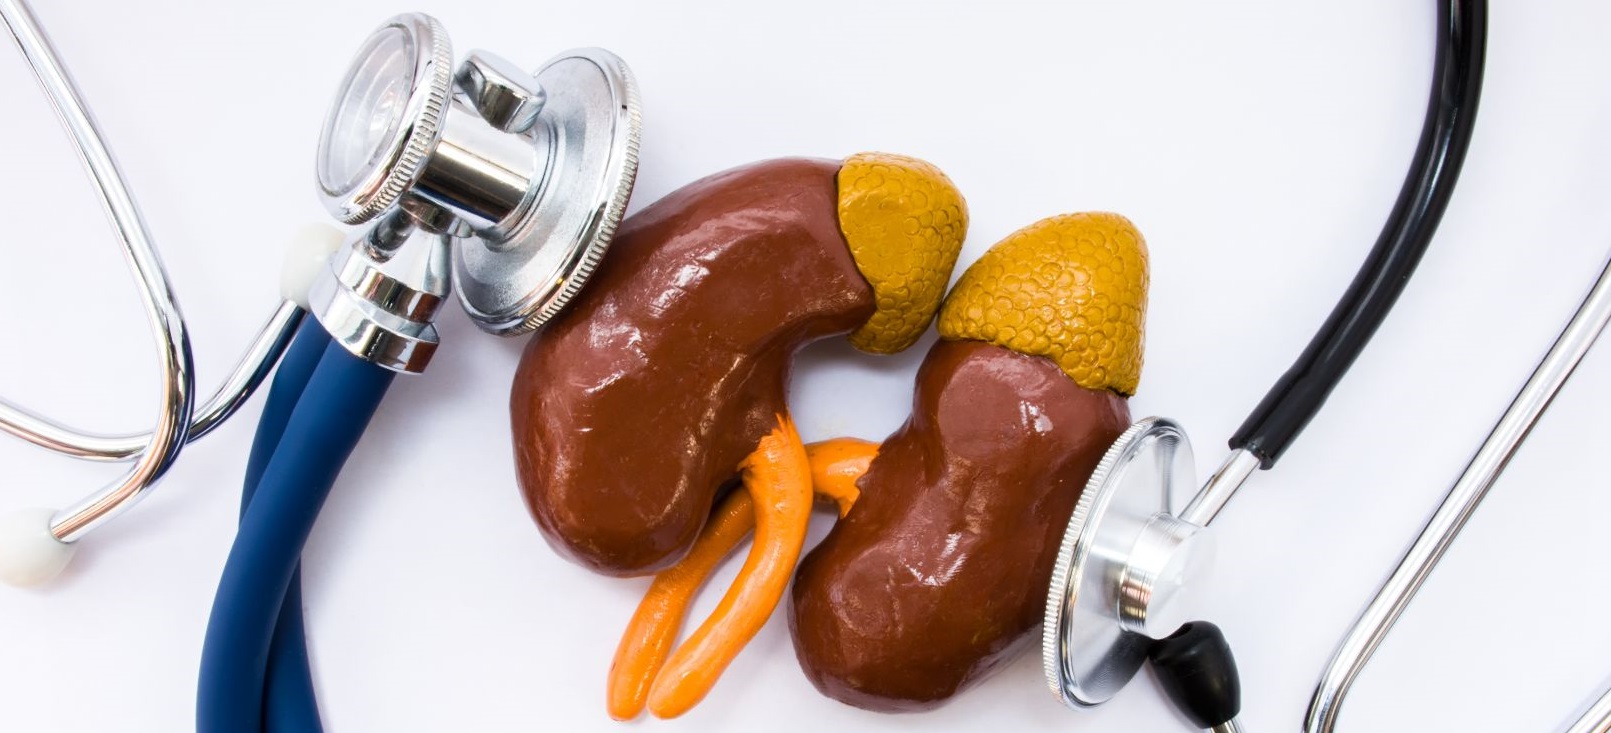 Image of model kidneys and stethoscope